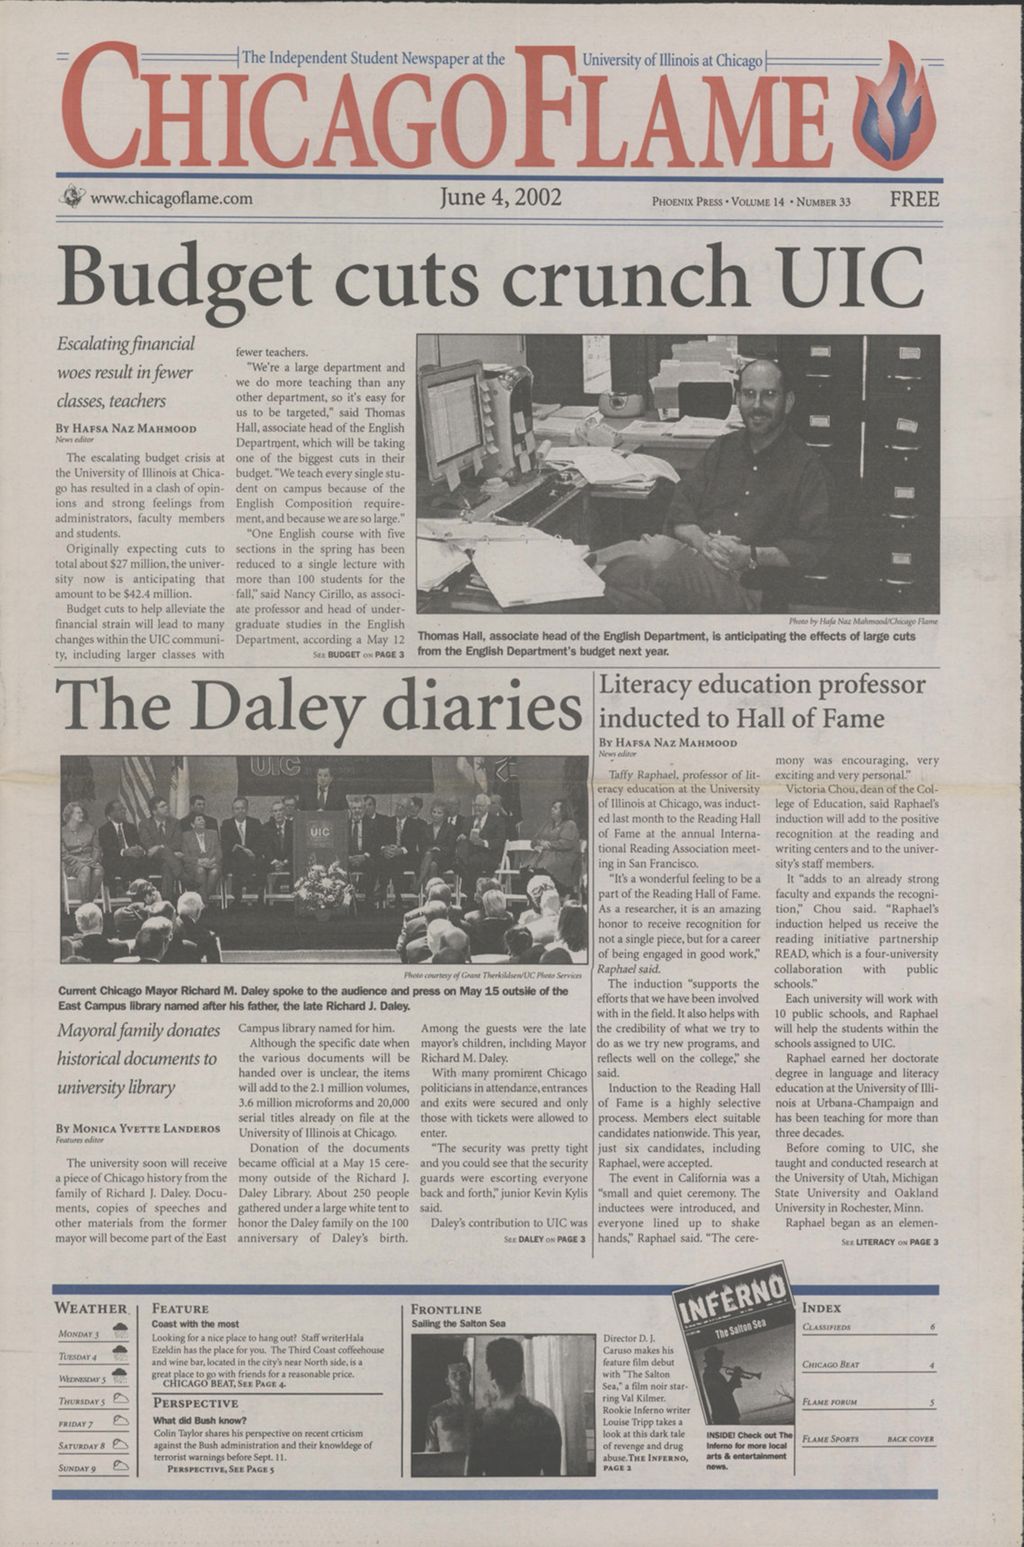 Chicago Flame (June 4, 2002)